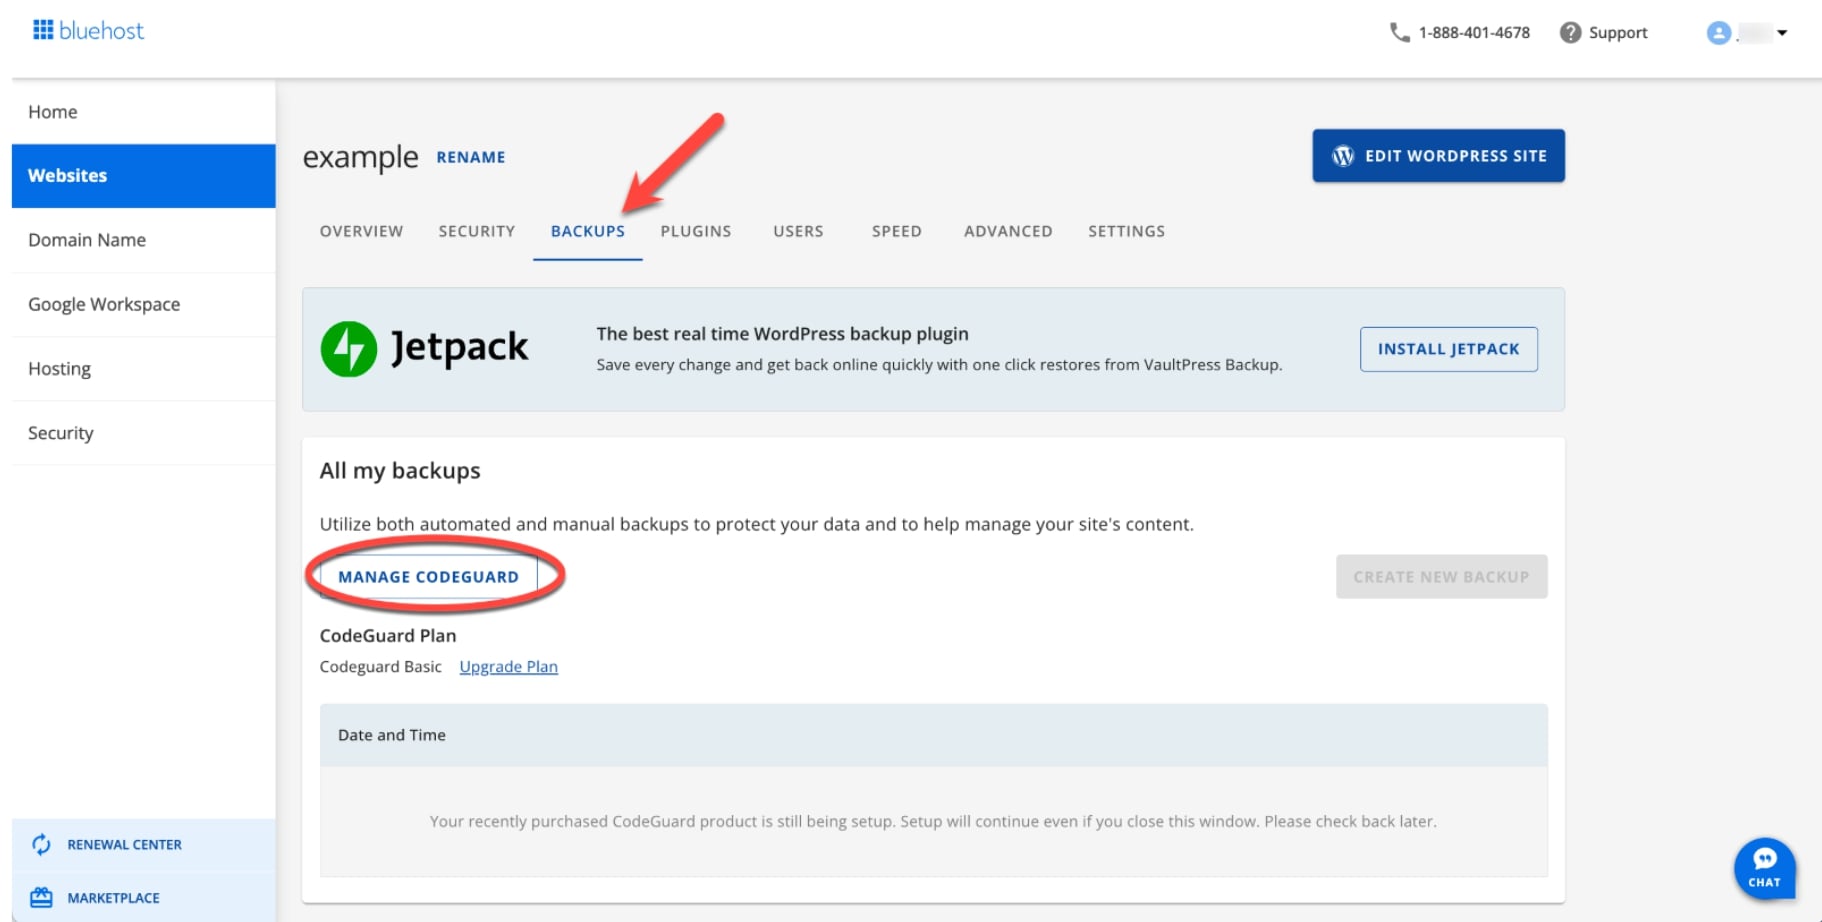 Bluehost security backup feature